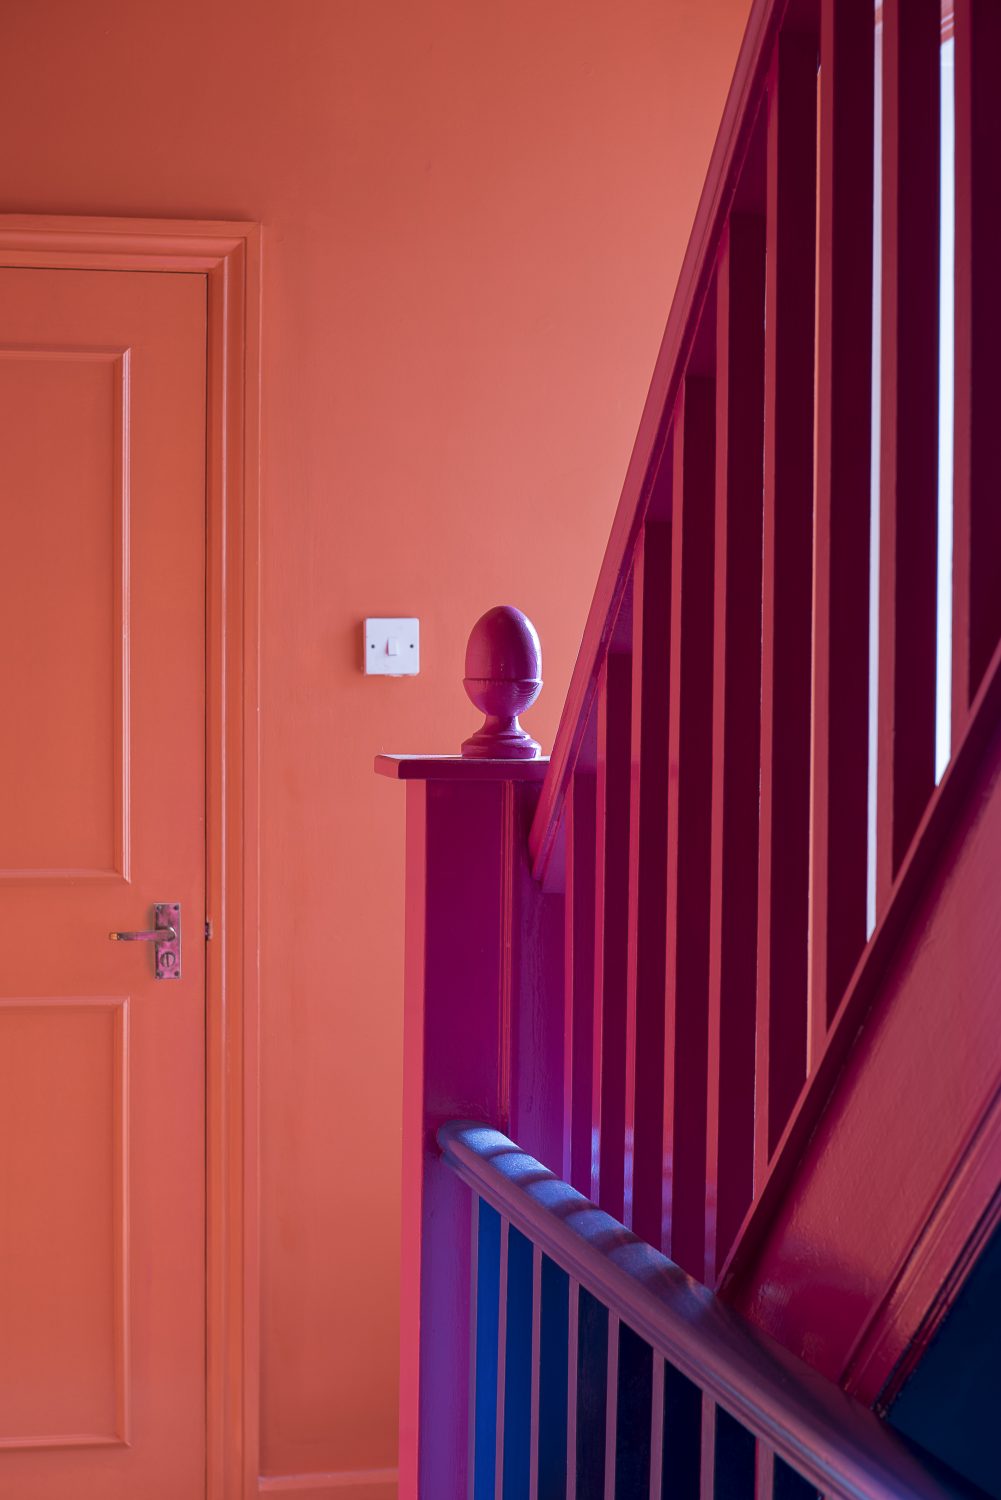 The staircase is a riot of pink and orange and is home to an Elvis bust spray painted by Amy the day before our visit